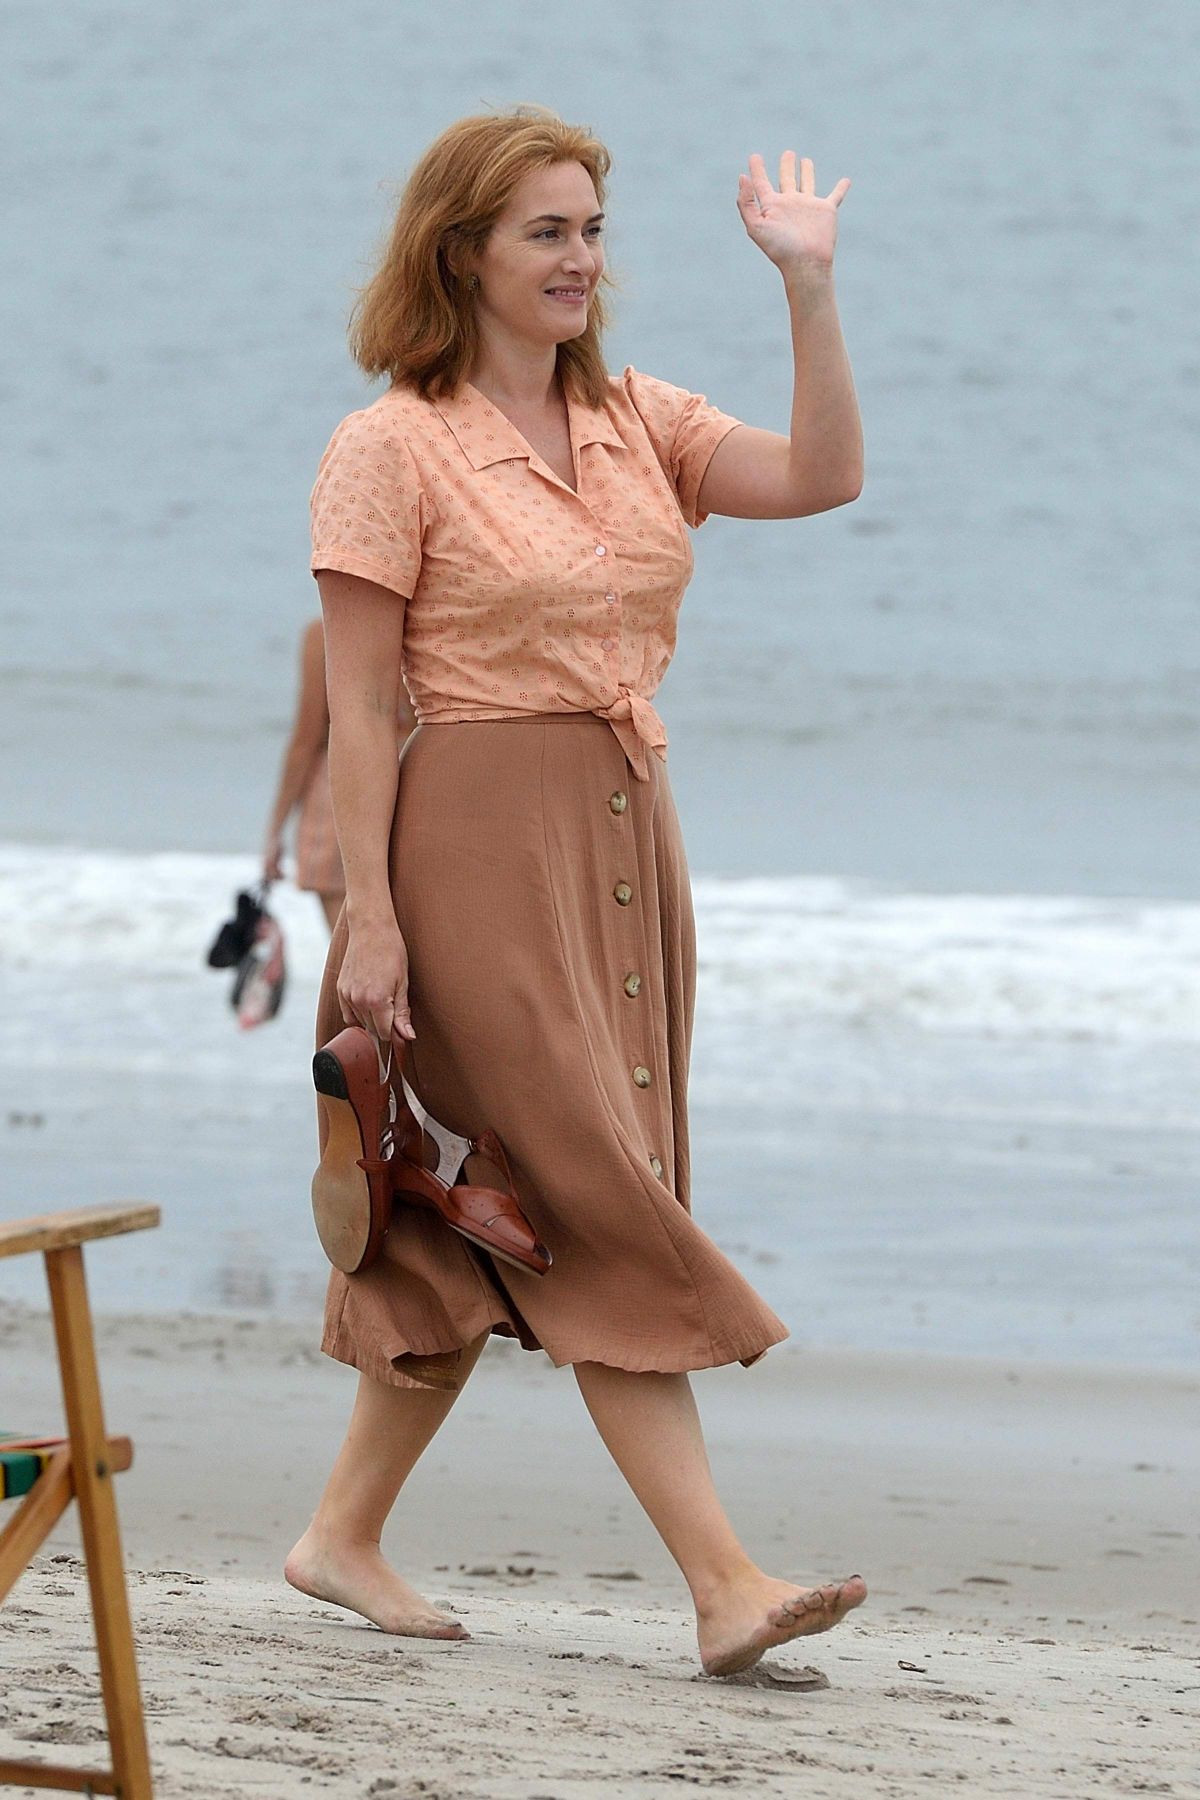 Kate Winslet On The Set Of Untitled Woody Allen Movie In New York 09 19 2016 4 Hawtcelebs